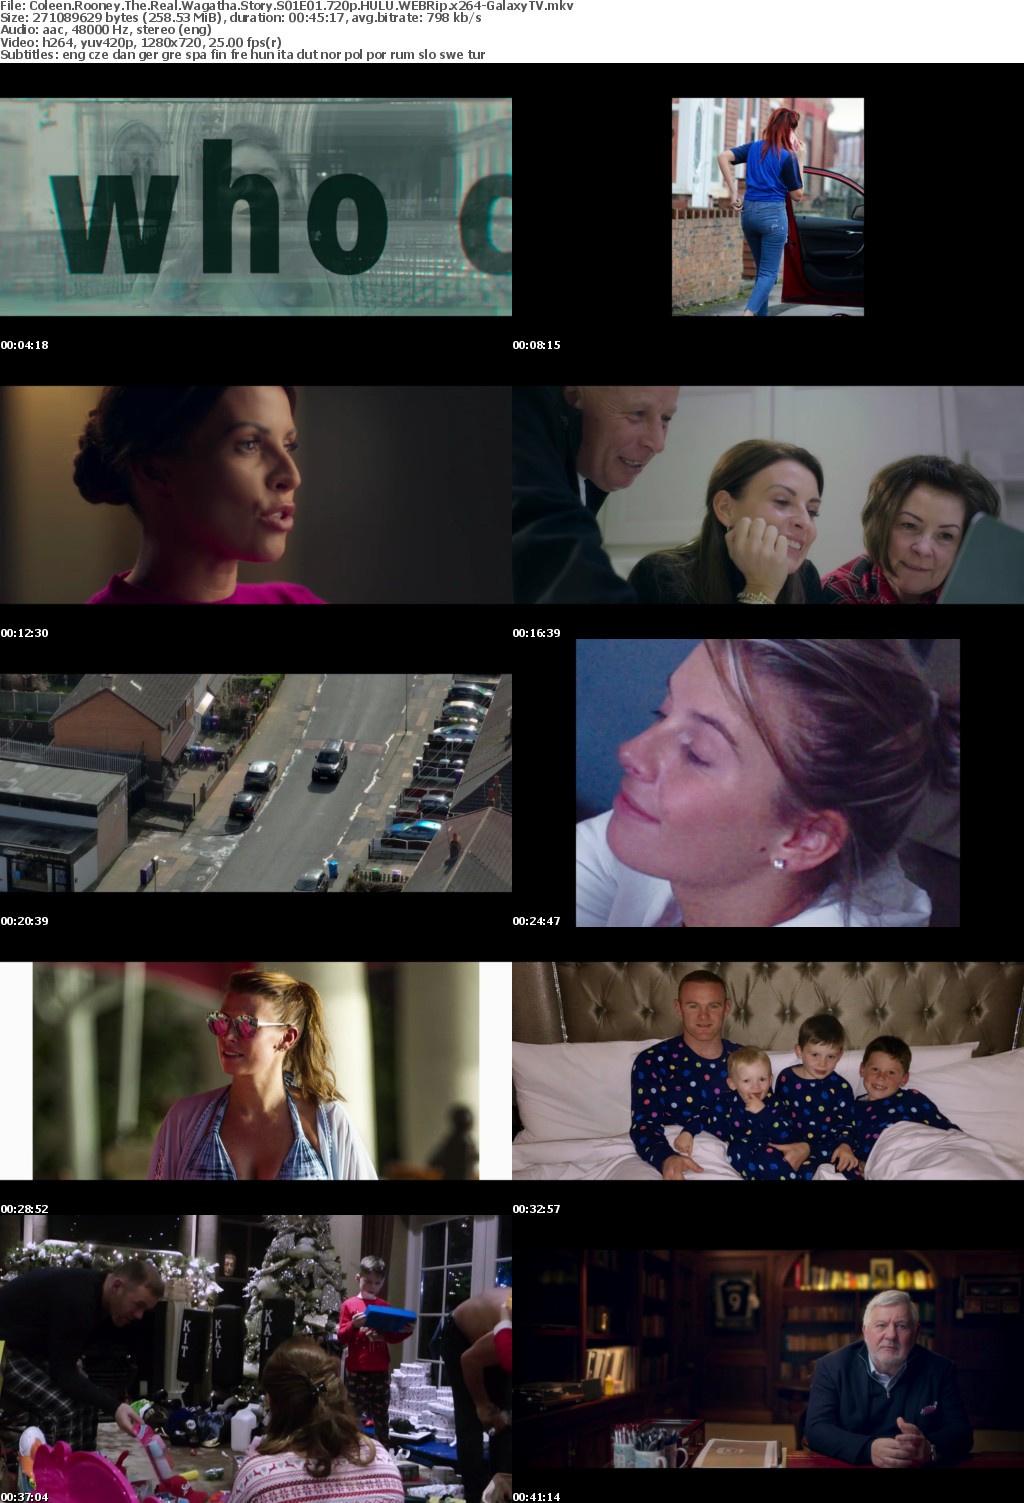 Coleen Rooney The Real Wagatha Story S01 COMPLETE 720p HULU WEBRip x264-GalaxyTV